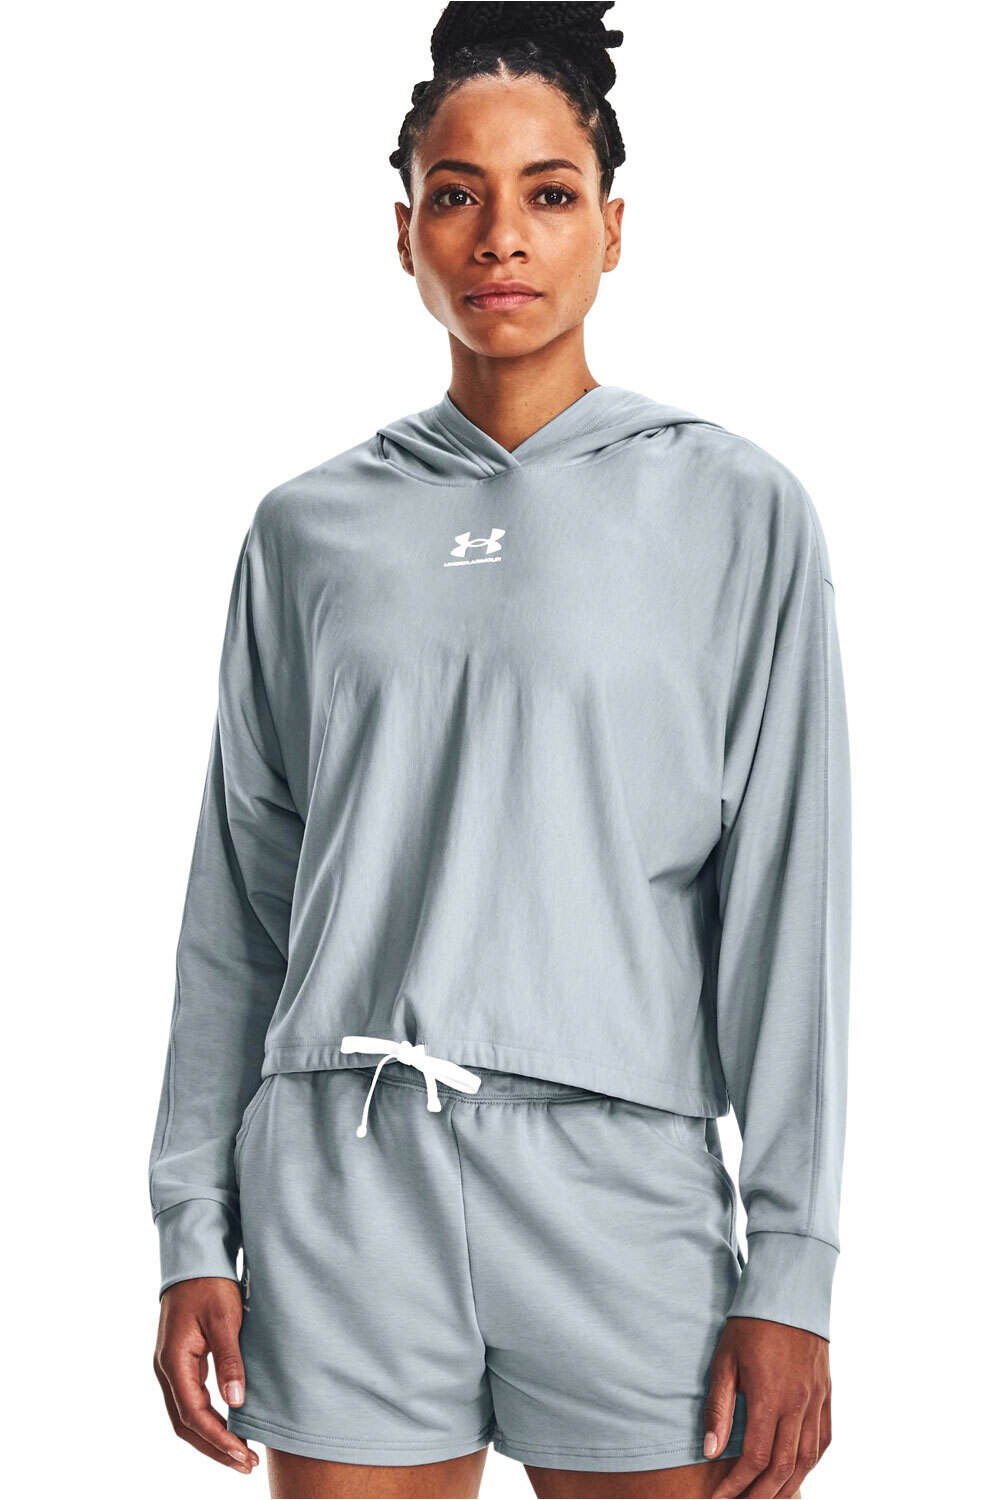 Under Armour sudadera mujer UA Rival Terry Oversized HD vista frontal